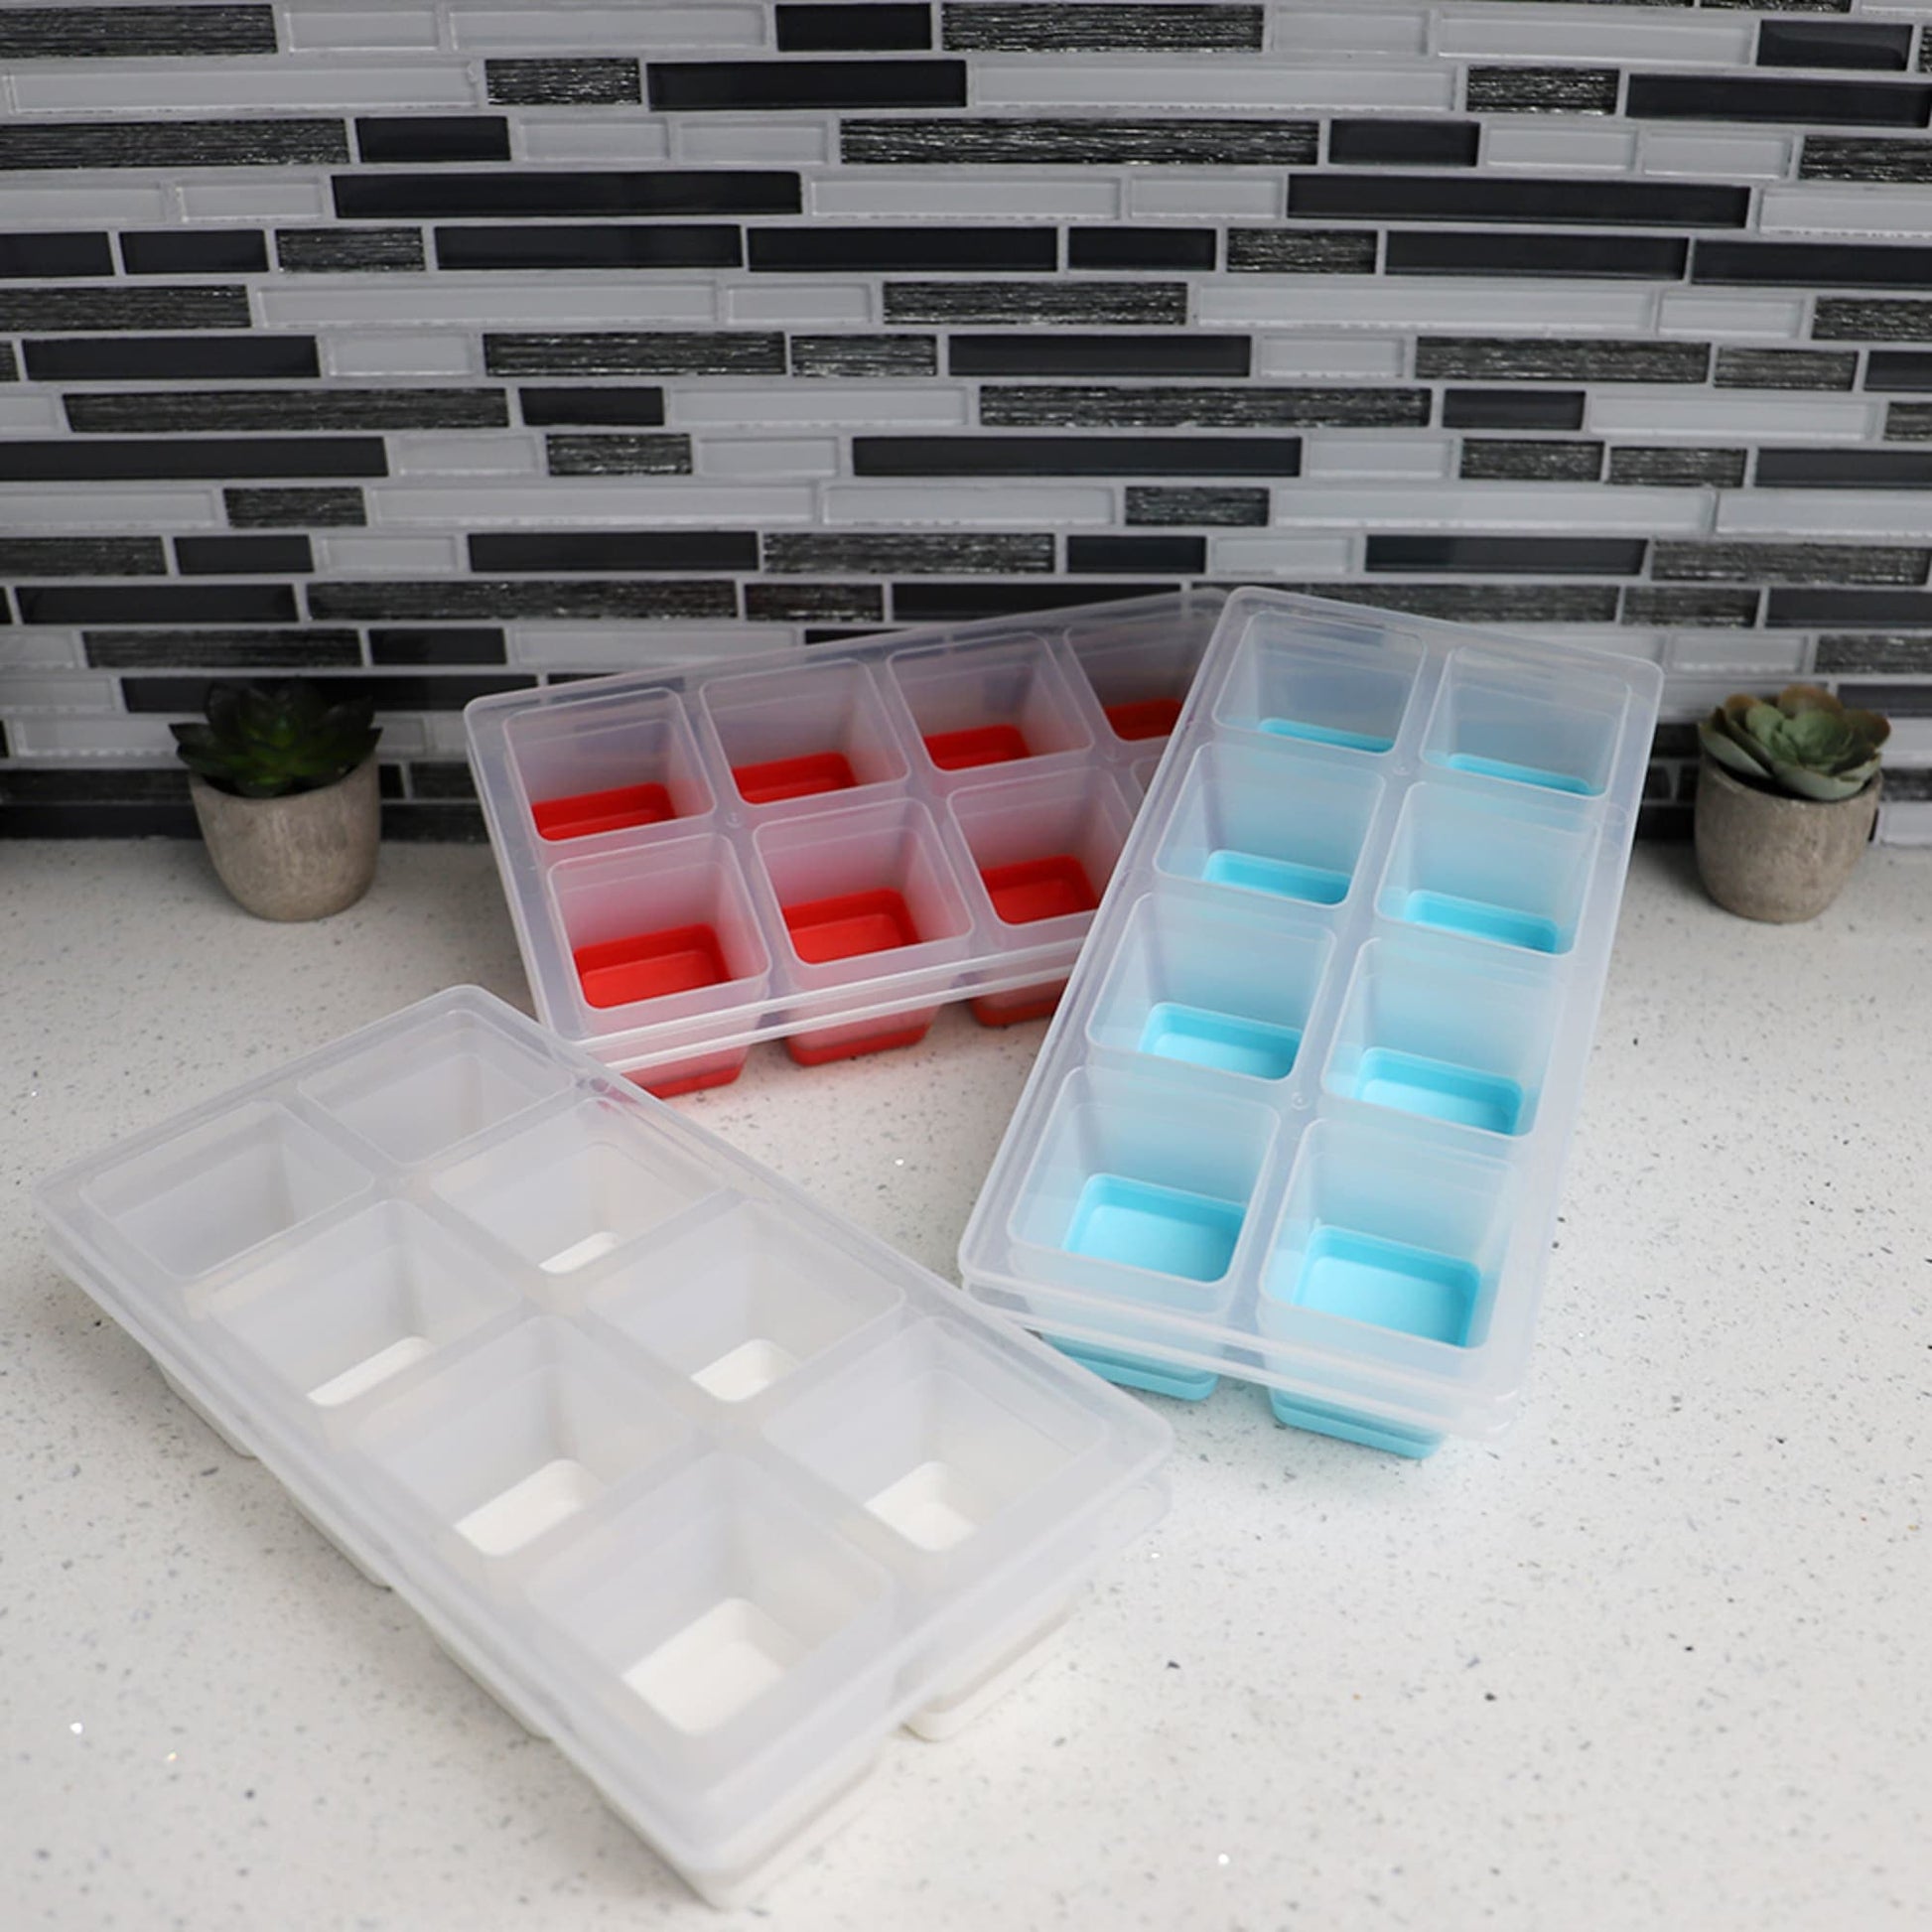  Home Ice California Cocktail Ice Tray - Silicone Ice Mold -  Makes 6 Large Ice Cubes: Home & Kitchen